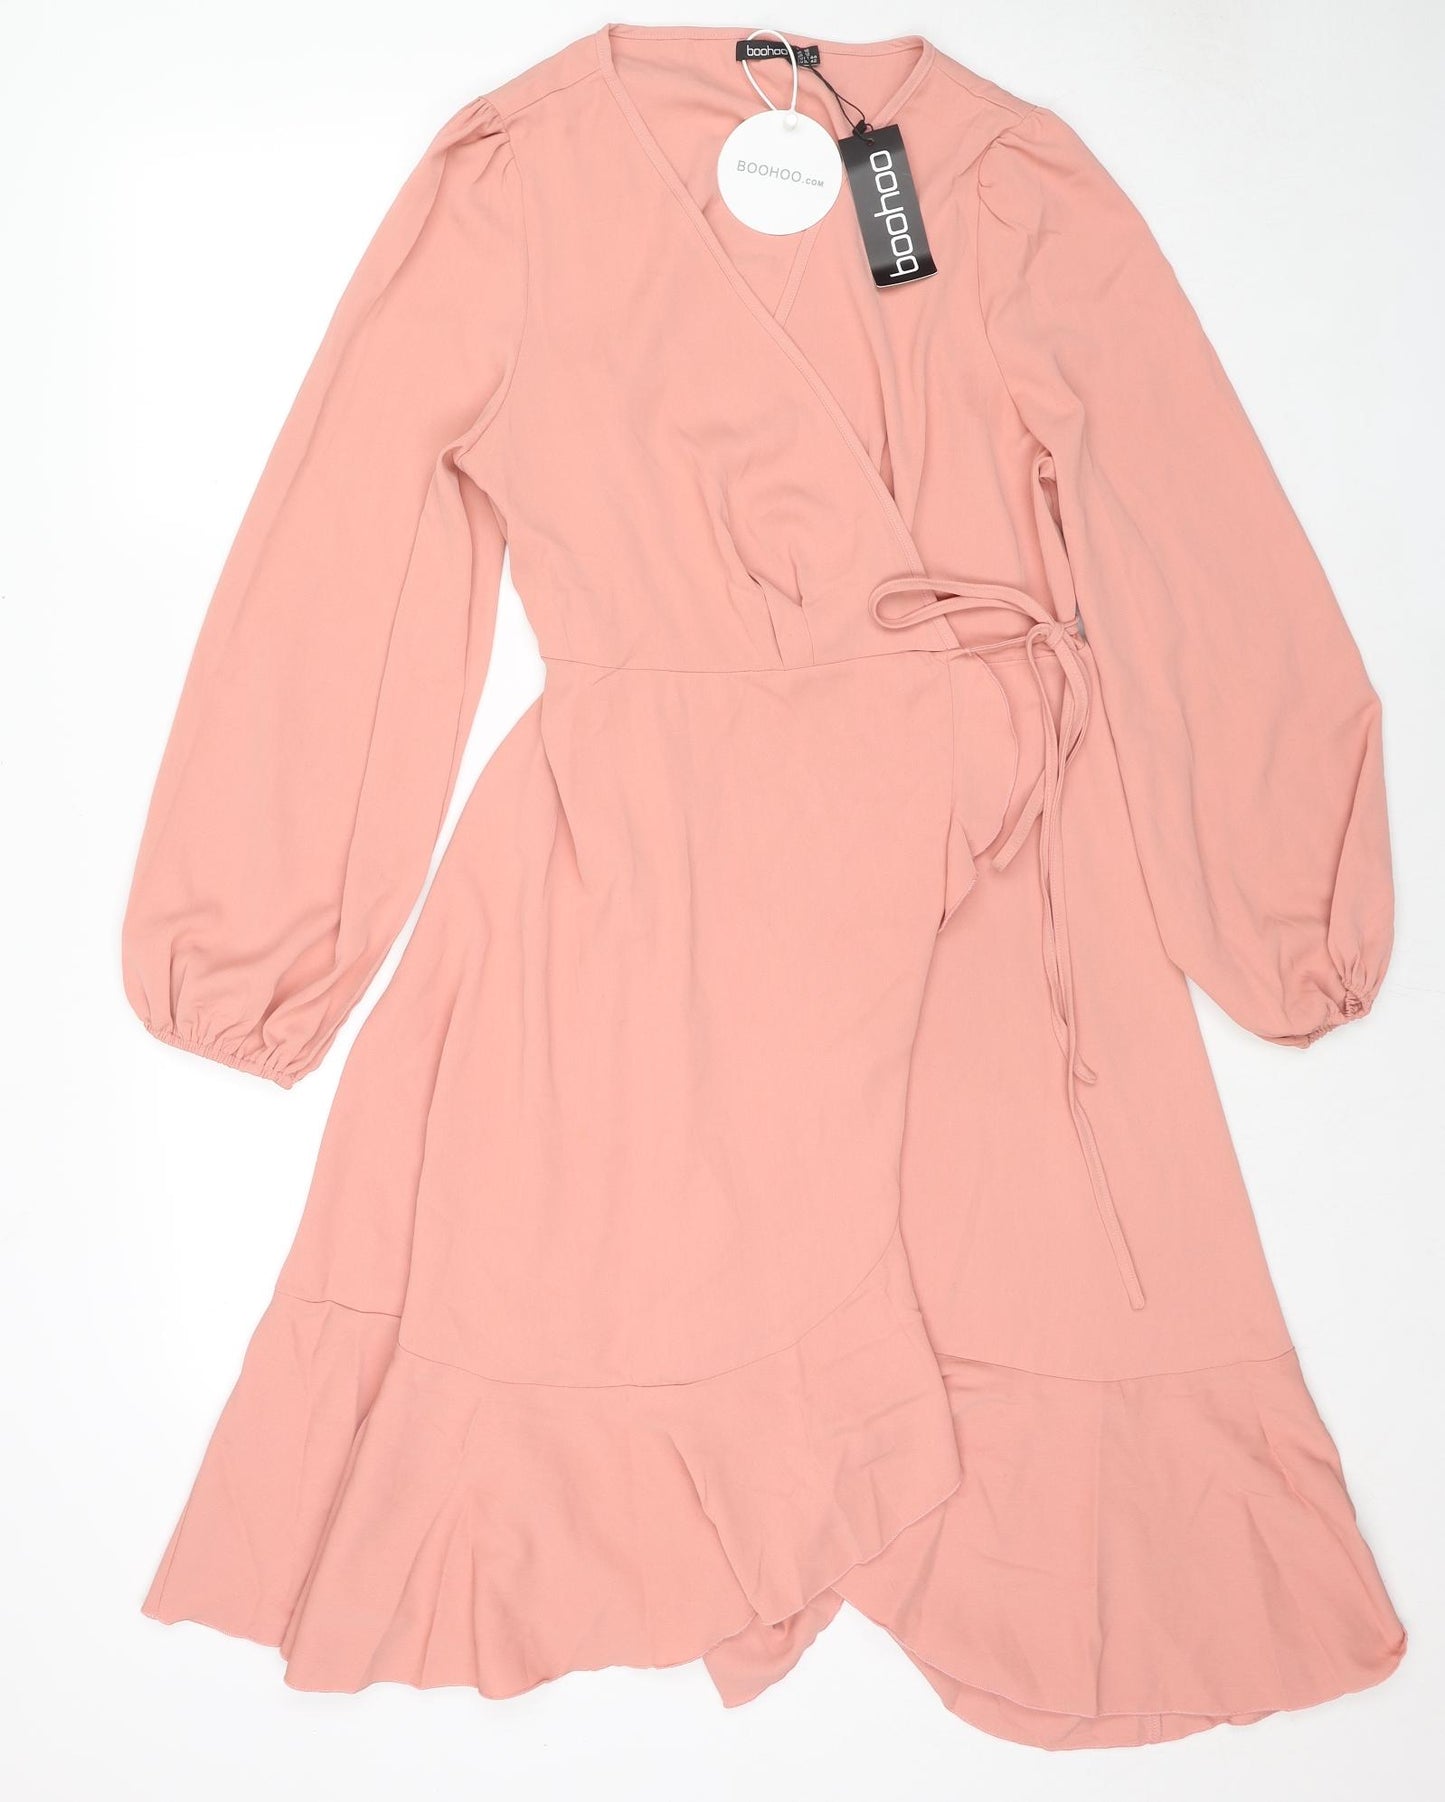 Boohoo Womens Pink Polyester Wrap Dress Size 16 V-Neck Tie